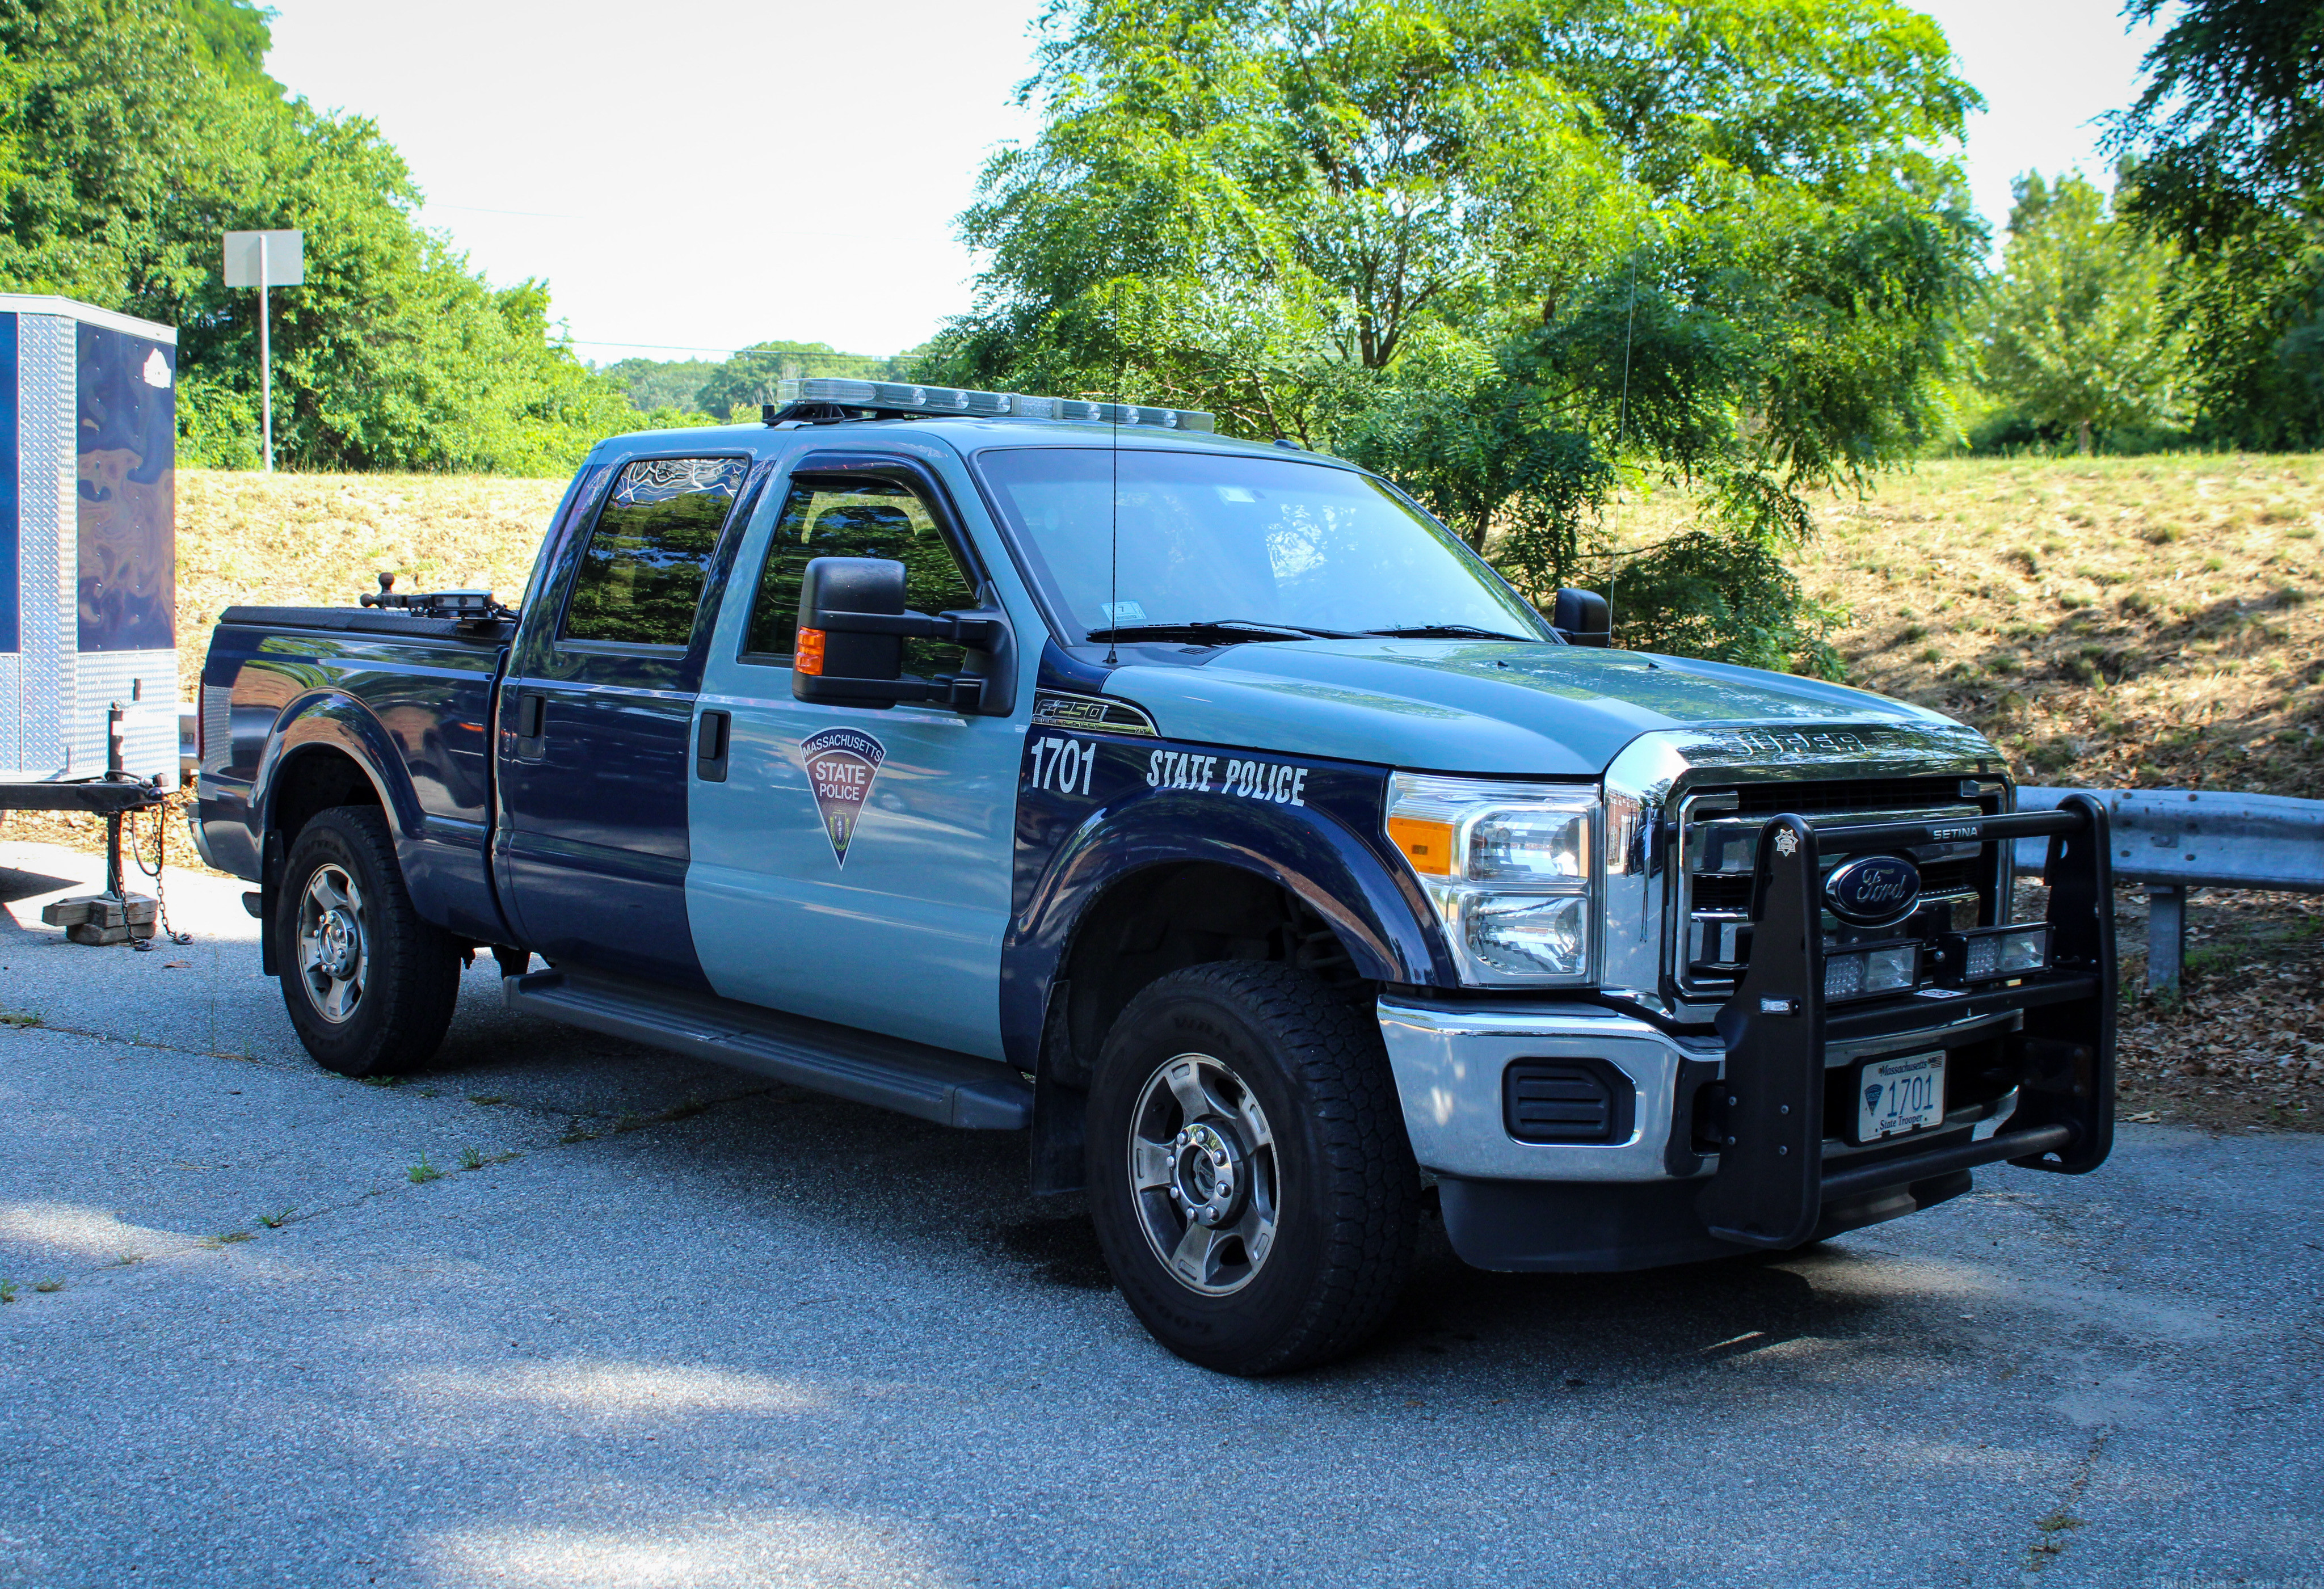 A photo  of Massachusetts State Police
            Cruiser 1701, a 2016 Ford F-250             taken by Nicholas You